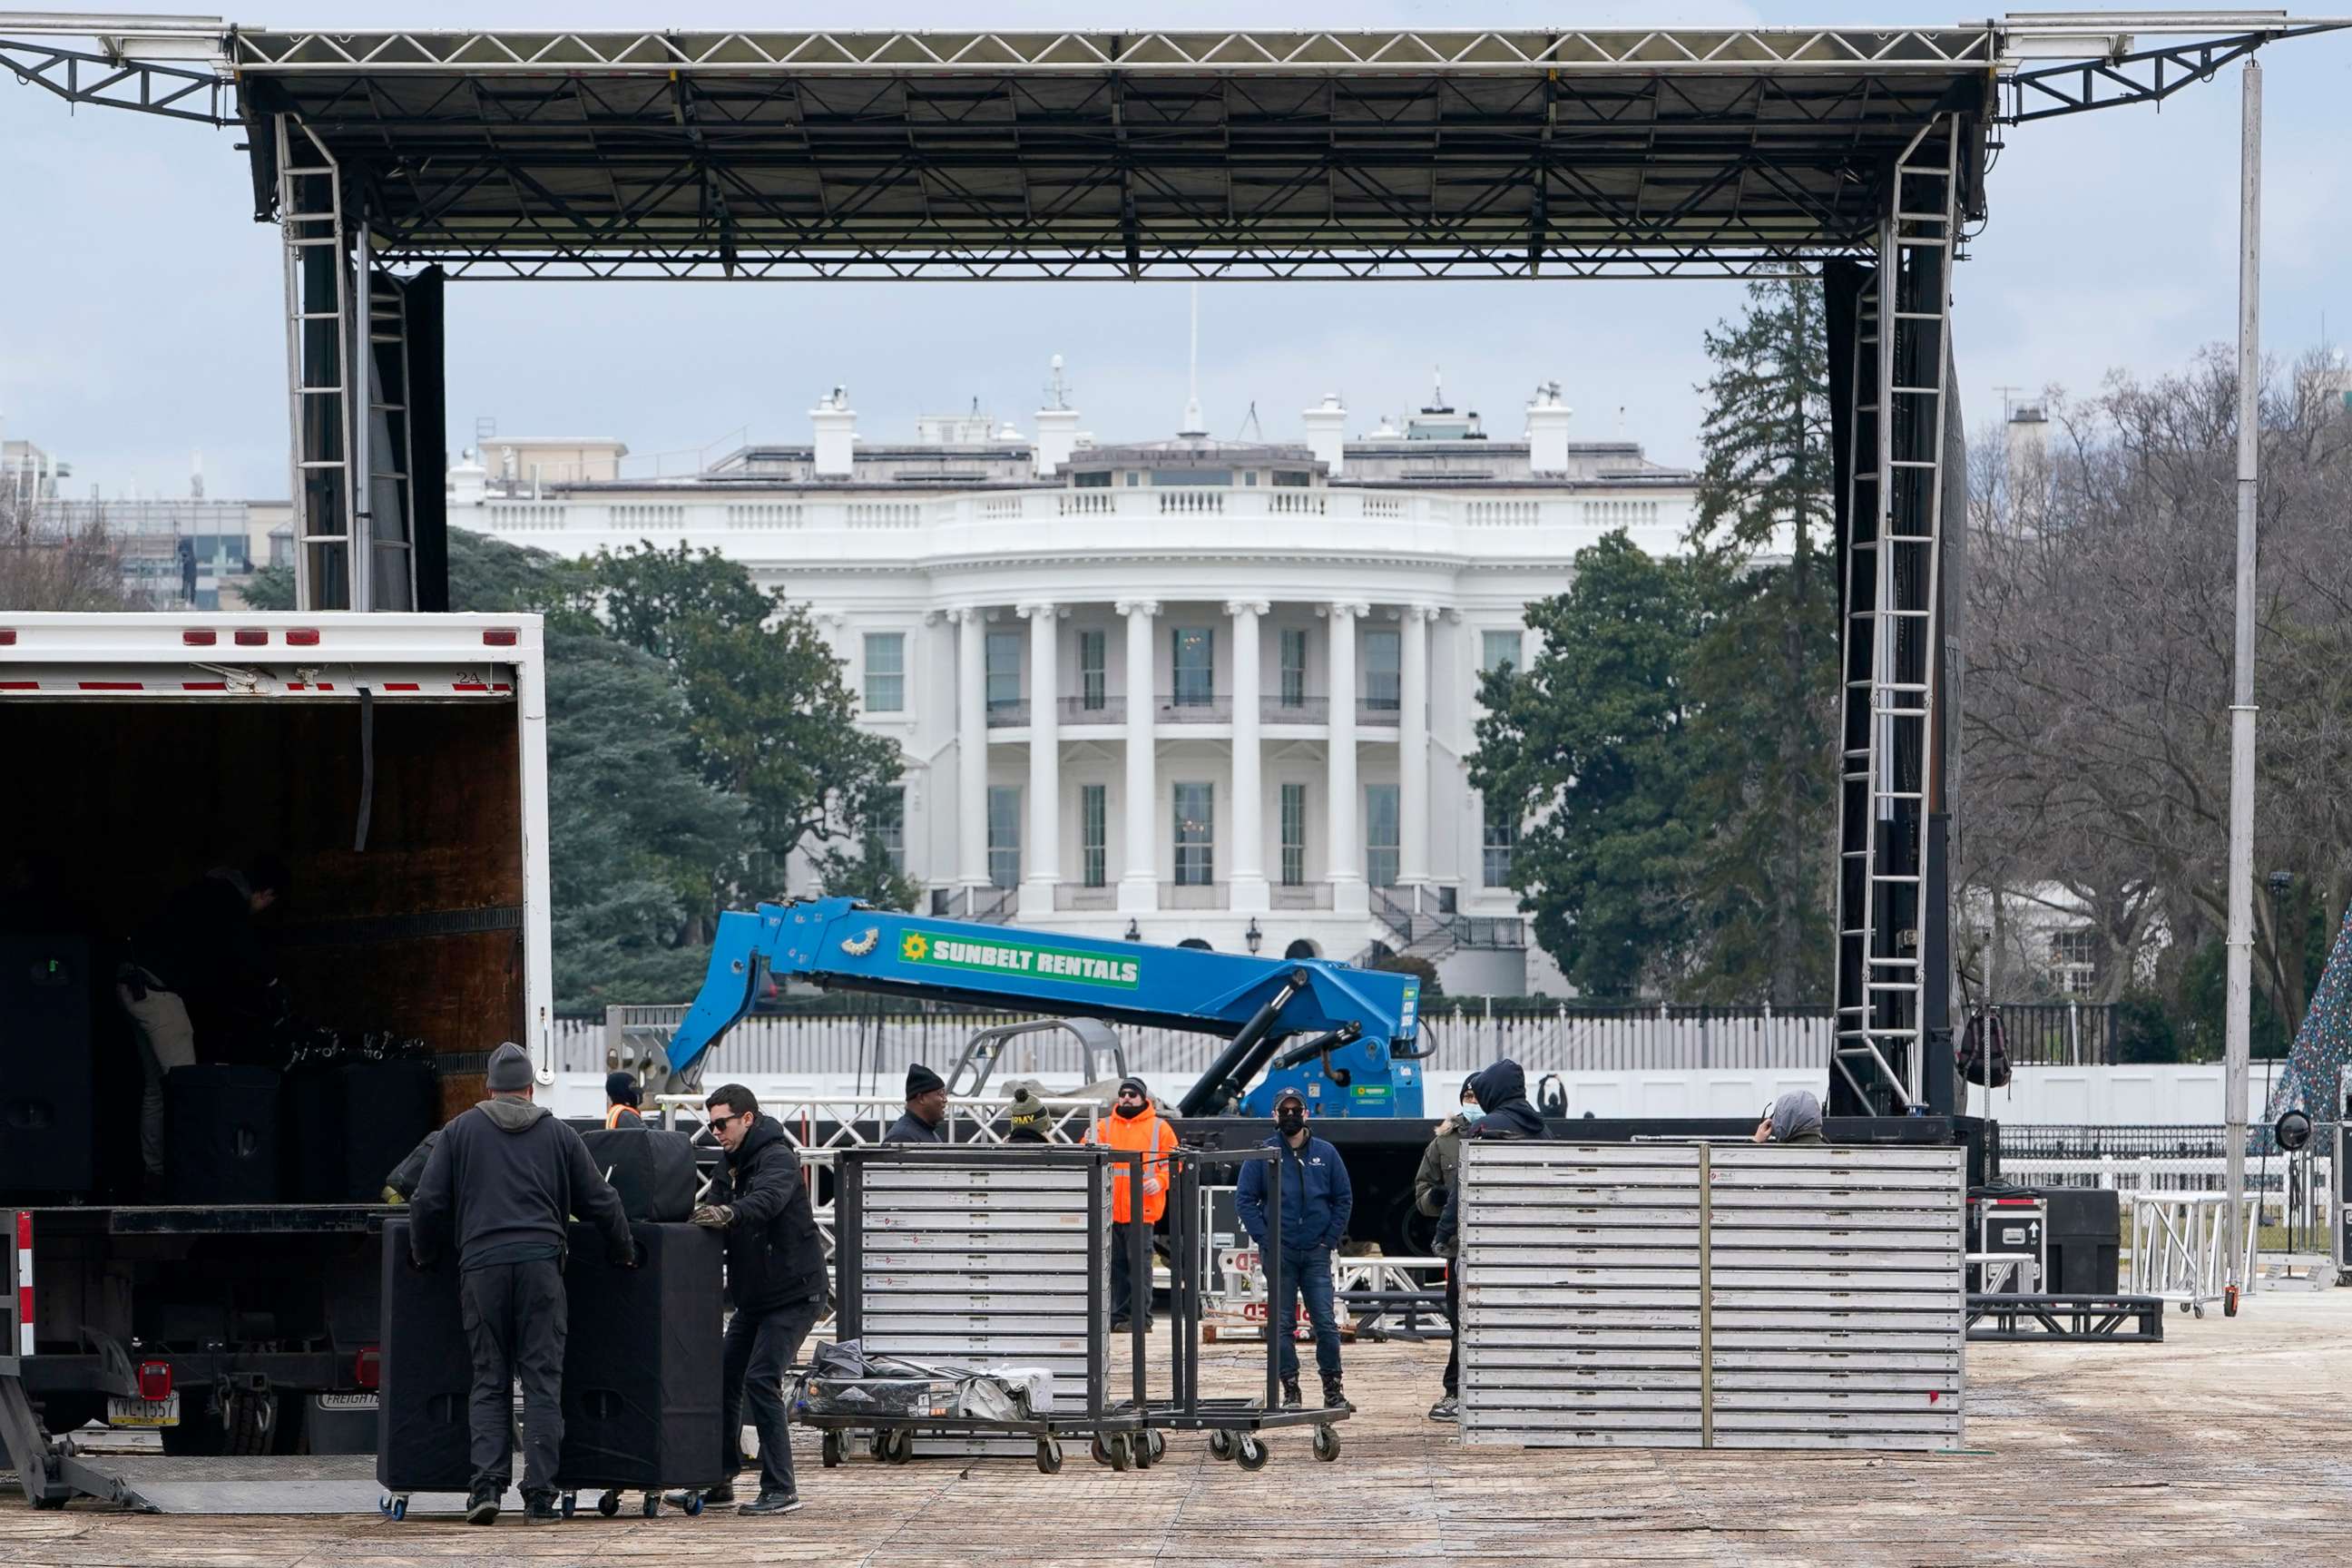 PHOTO: A stage is set up on the Ellipse near the White House in Washington, Jan. 4, 2021, in preparation for a rally on Jan. 6, the day when Congress is scheduled to meet to formally finalize the presidential election results.